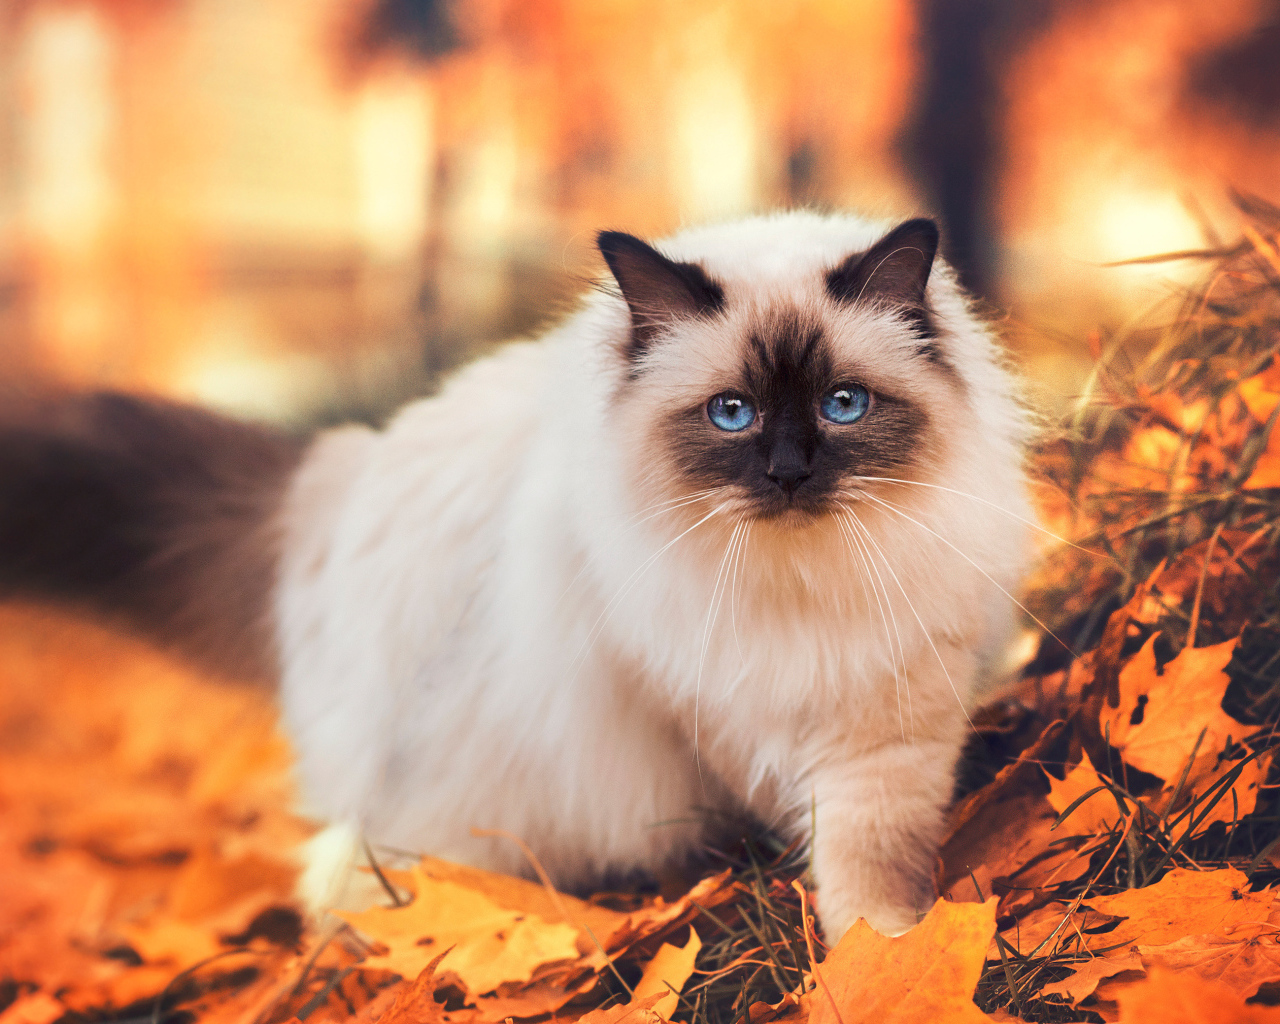 A pedigree Siamese cat with blue eyes walks along the yellow foliage